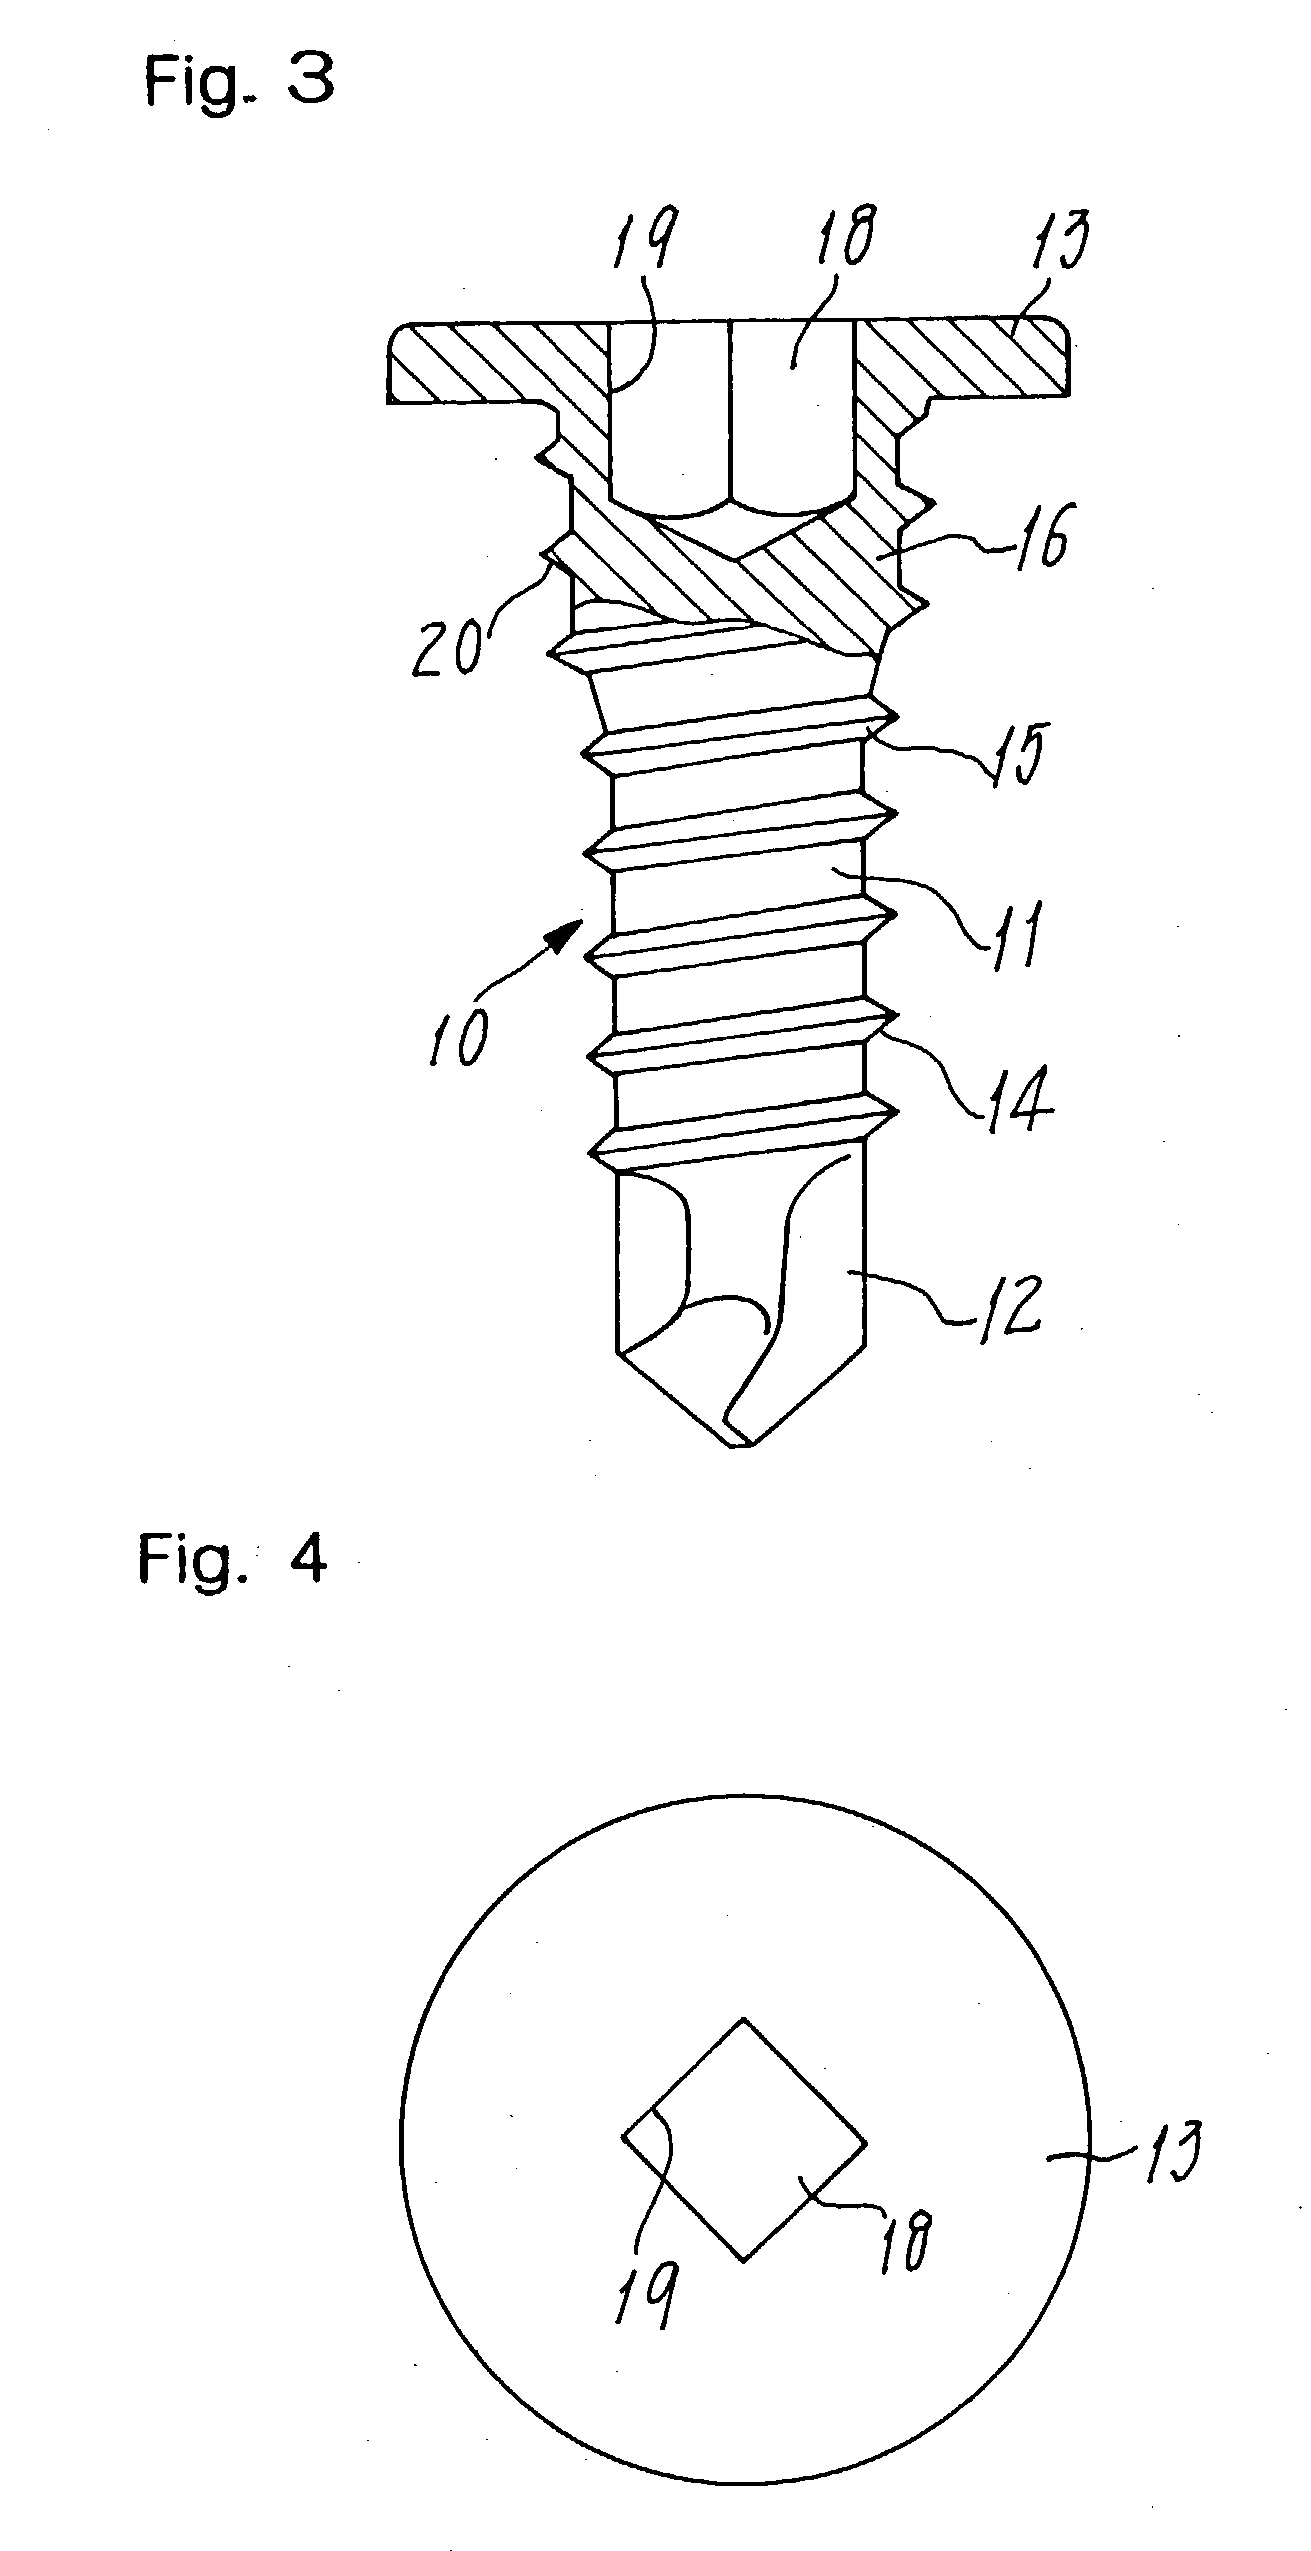 Self-drilling screw for use in steel houses